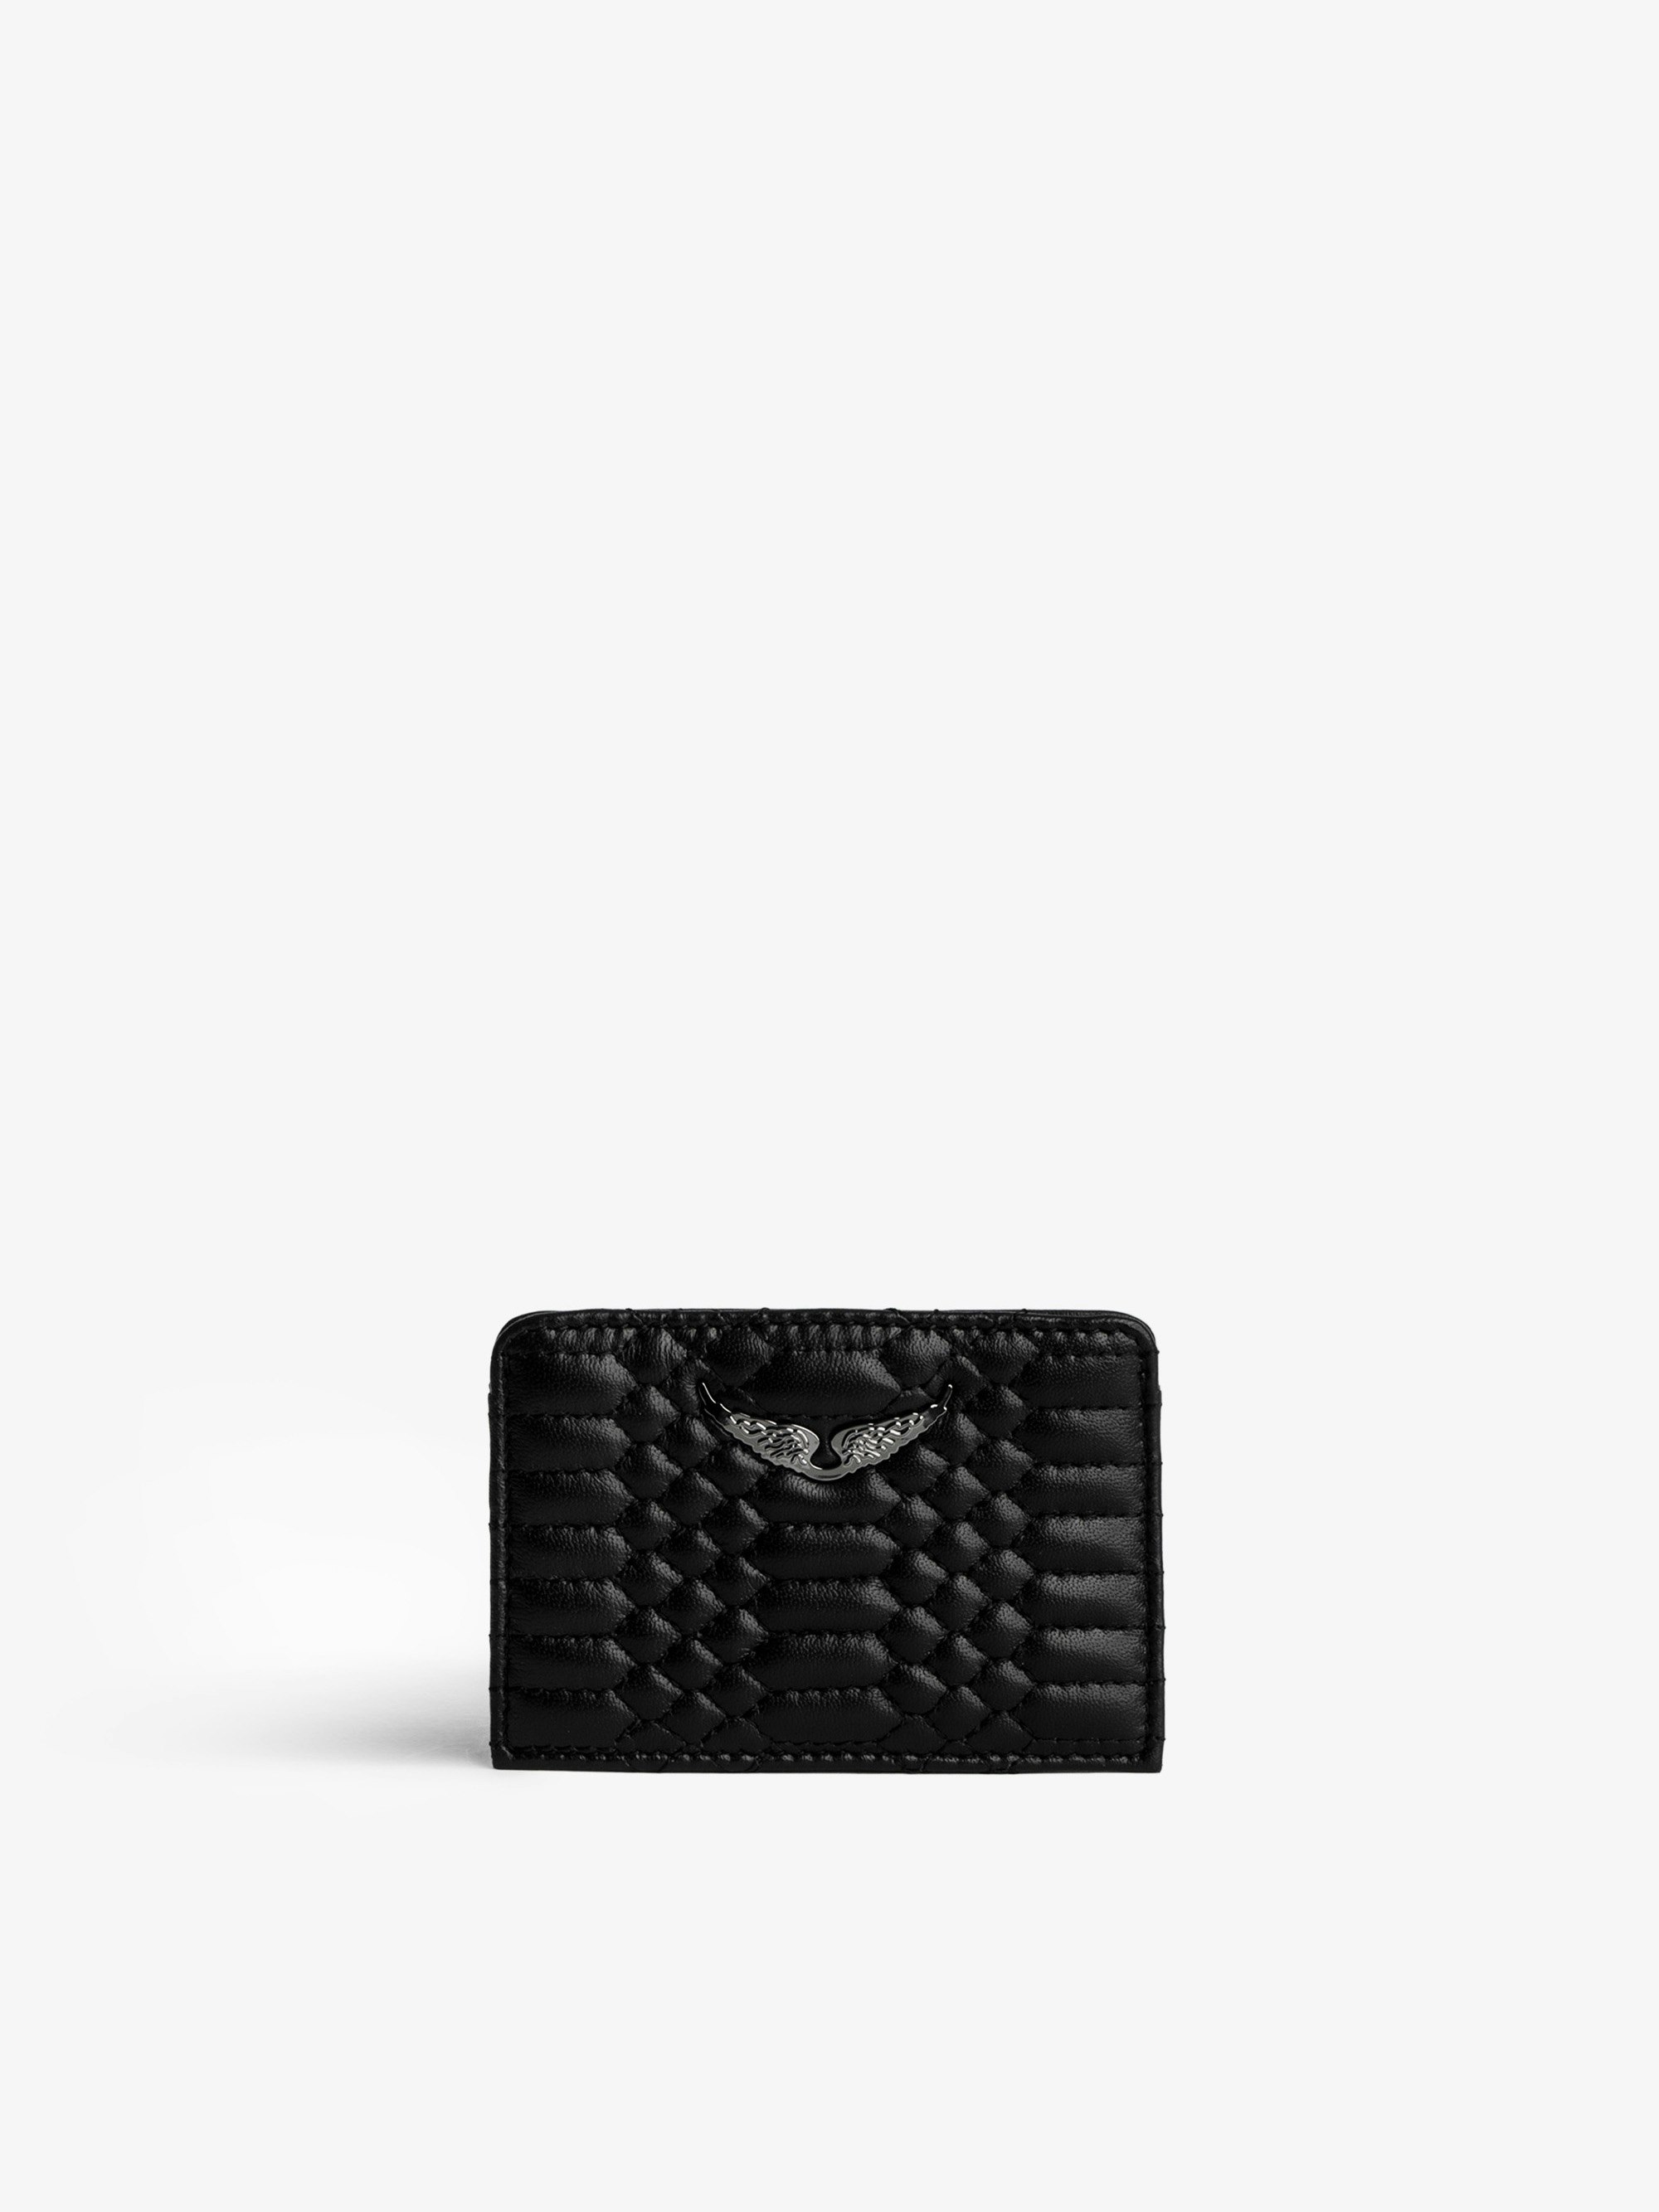 ZV Pass Card Holder - Women's matte black quilted leather card holder